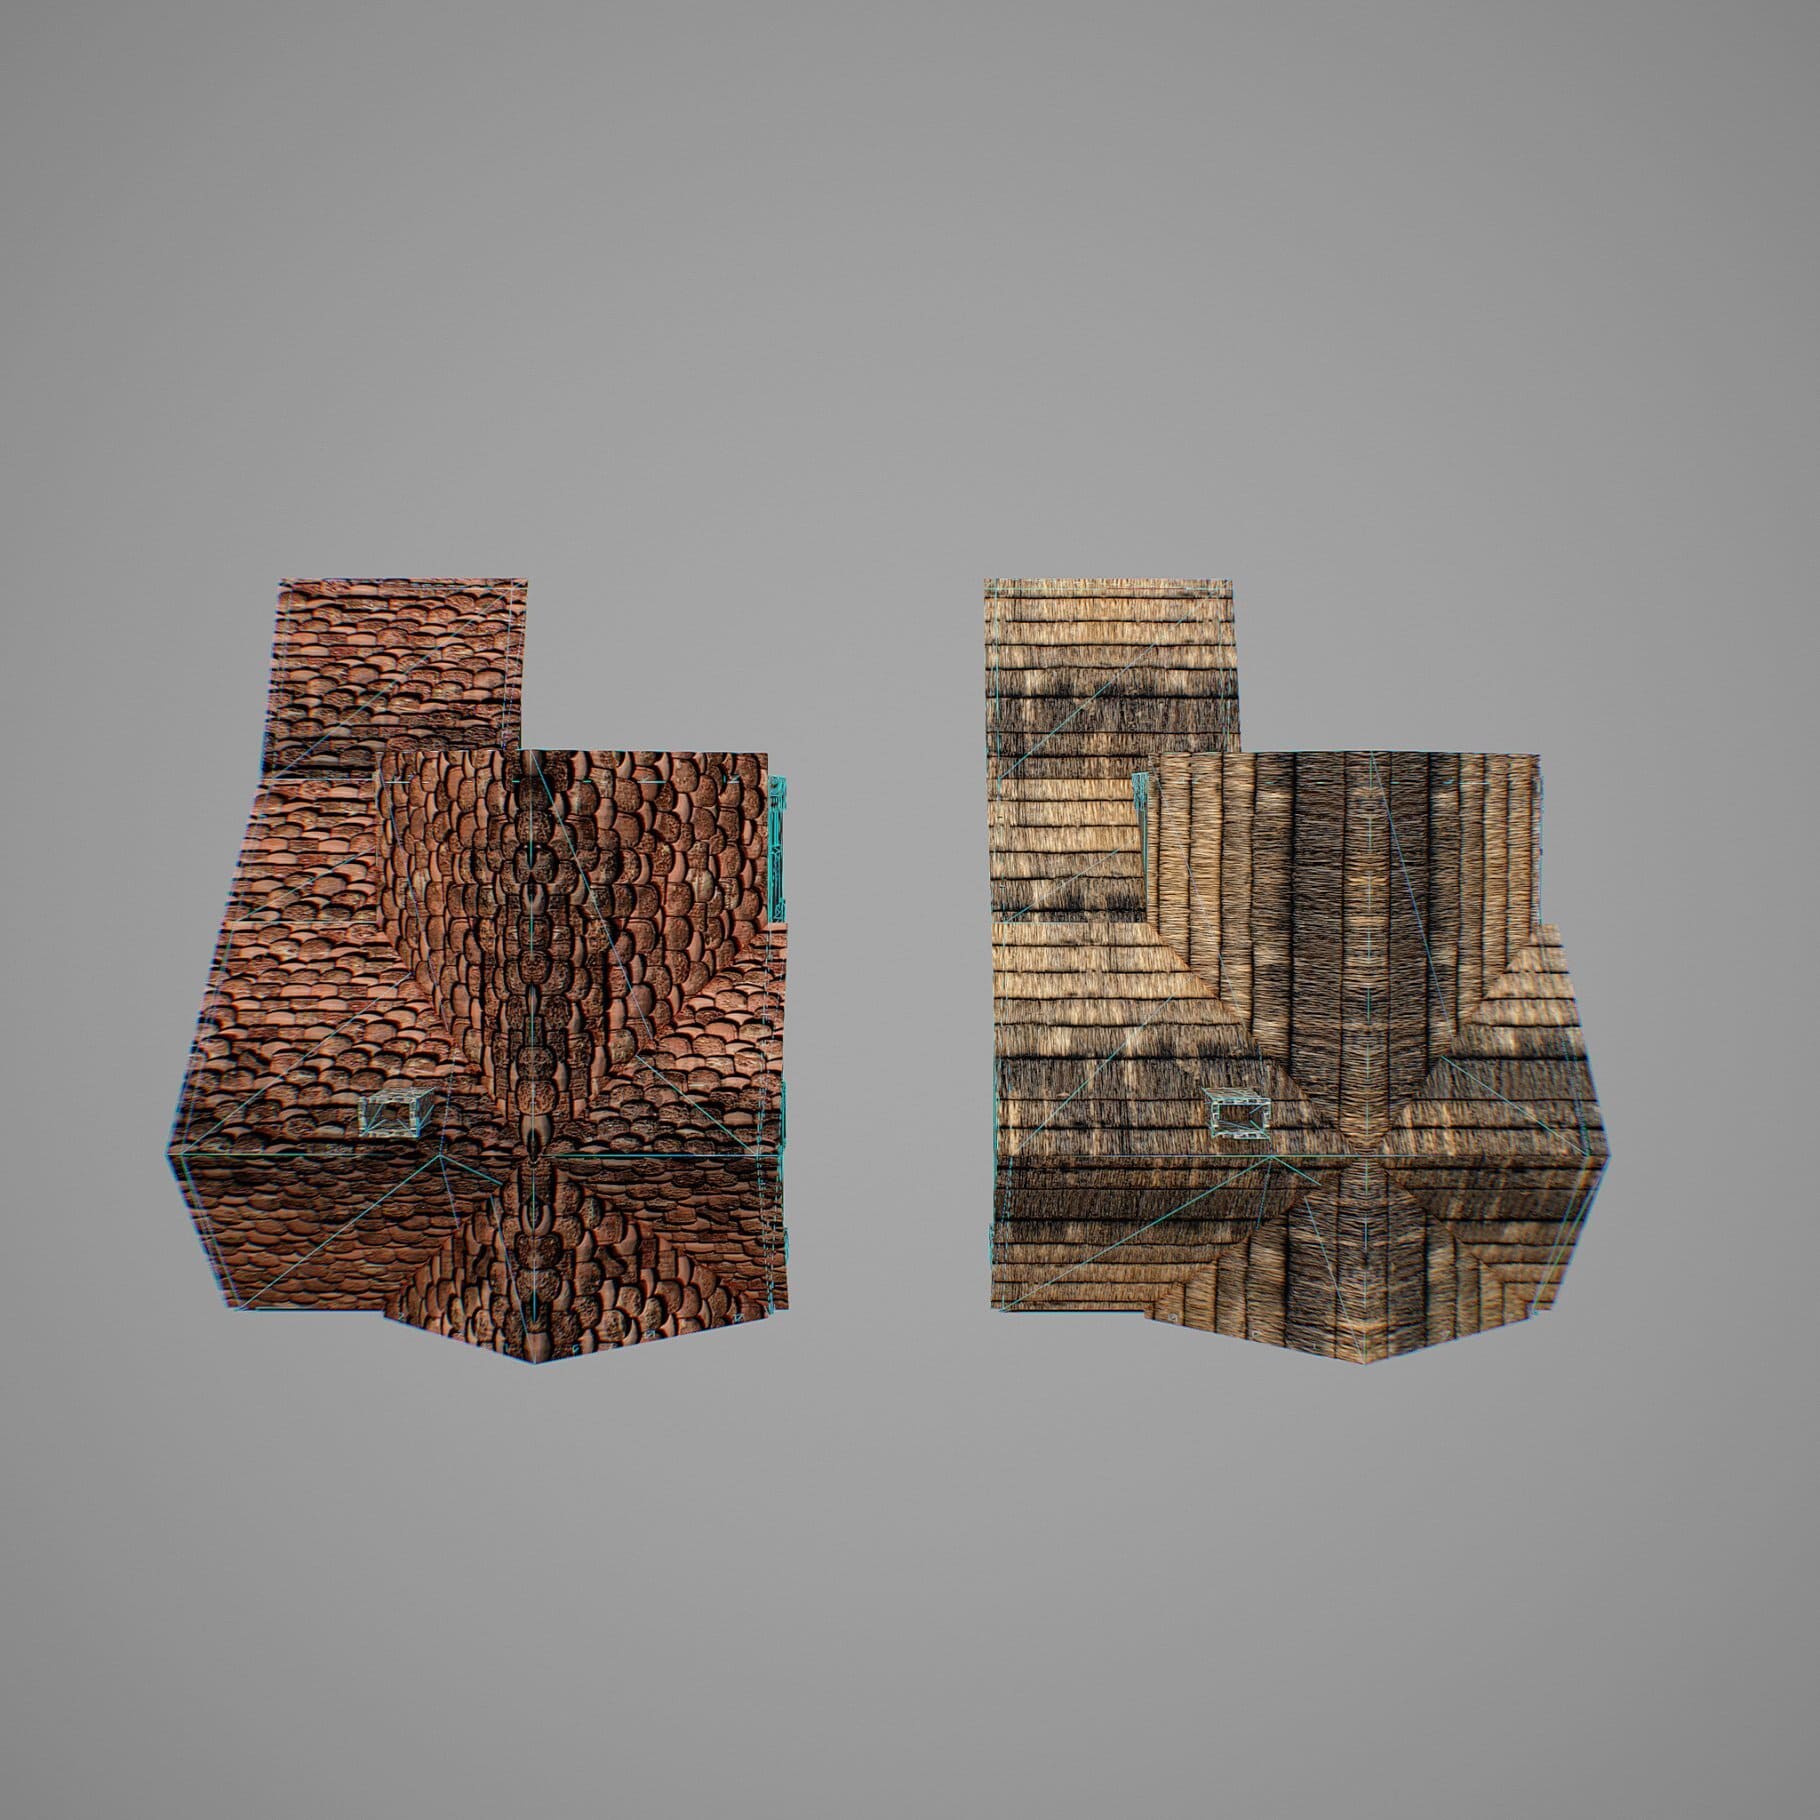 Top view of houses with roofs made of different materials.